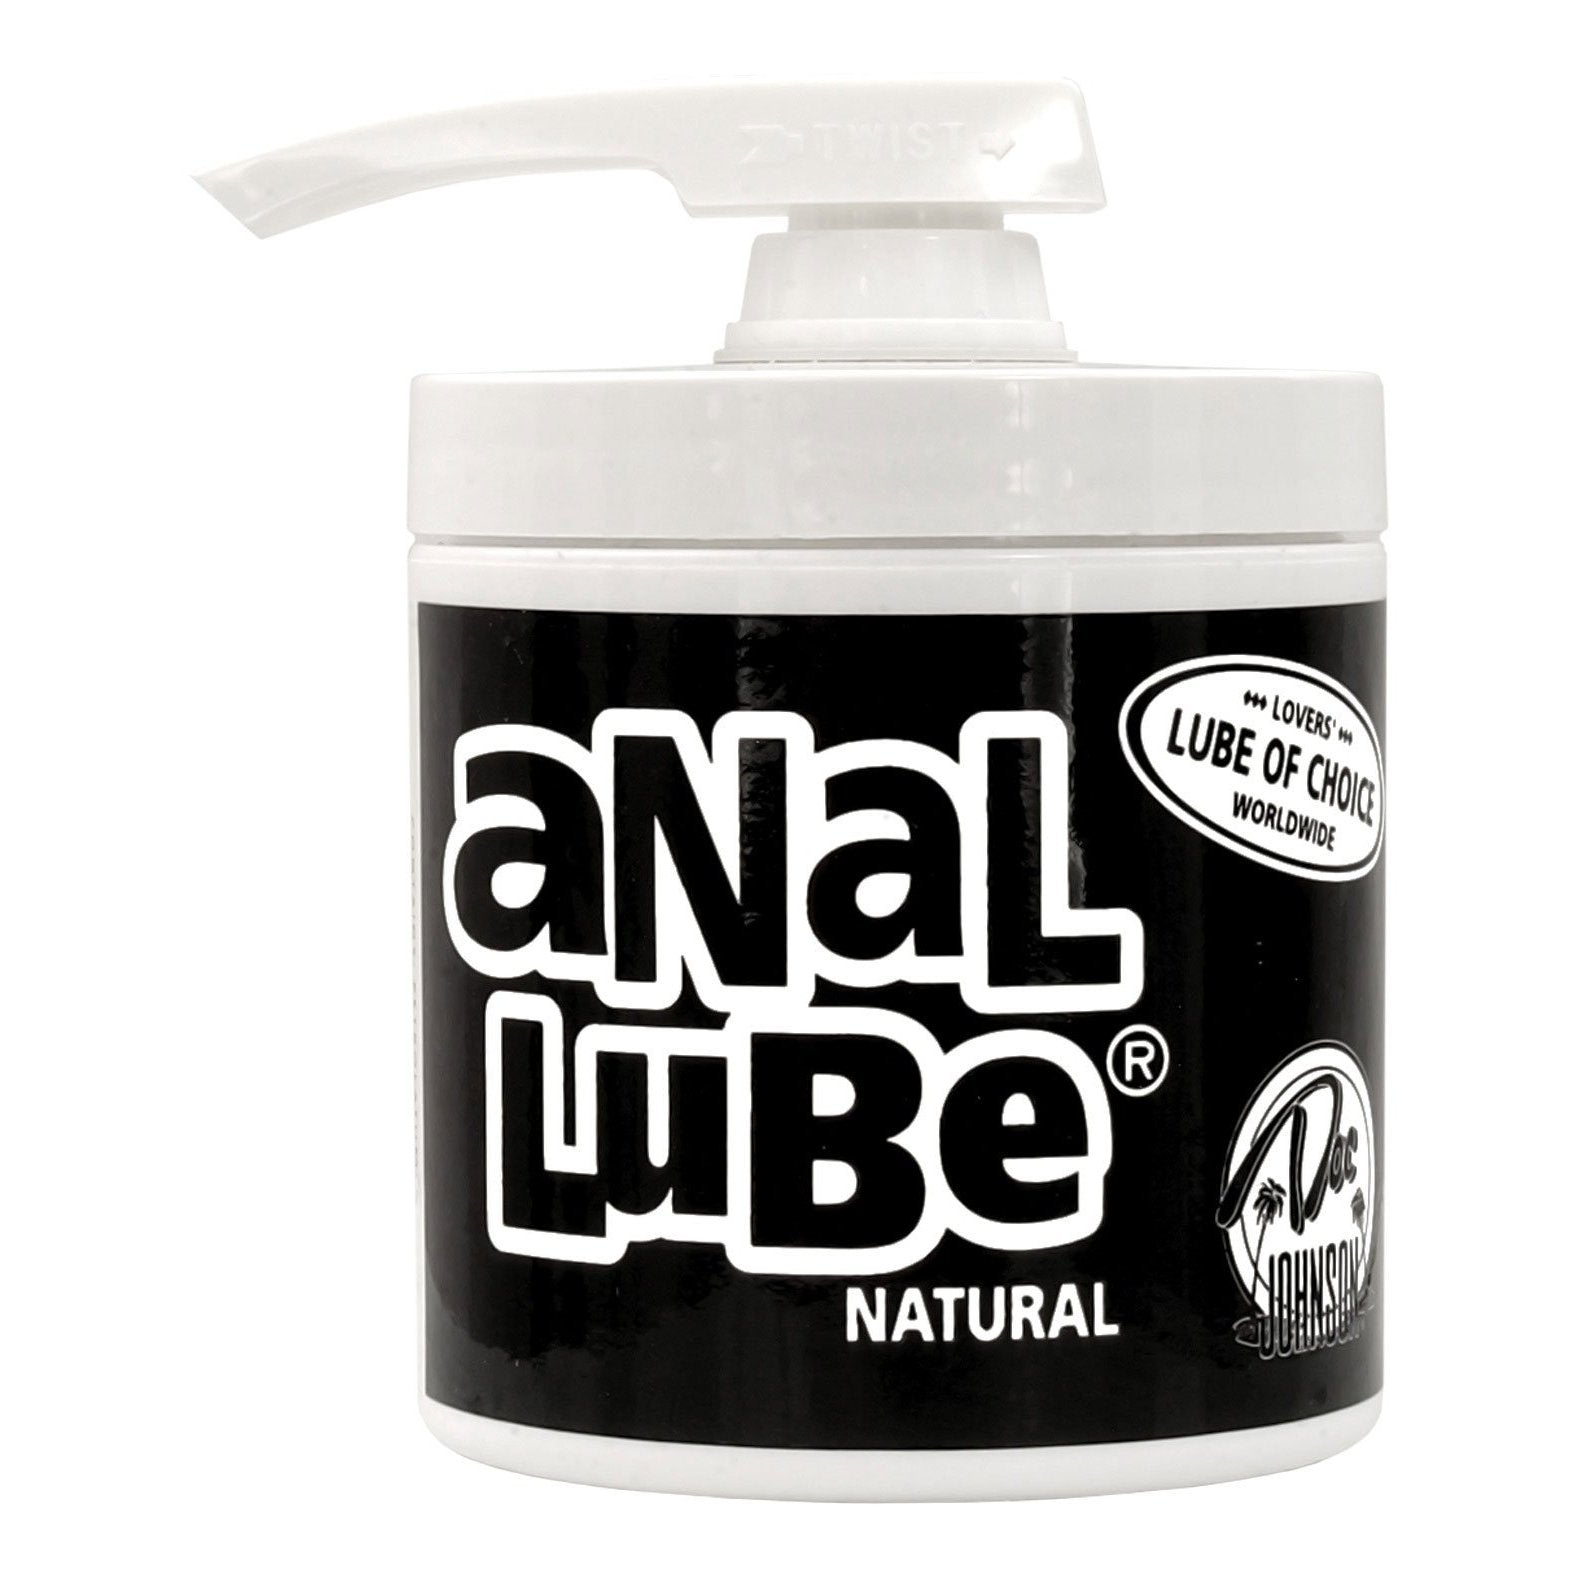 curtis hong recommends Anal With No Lube